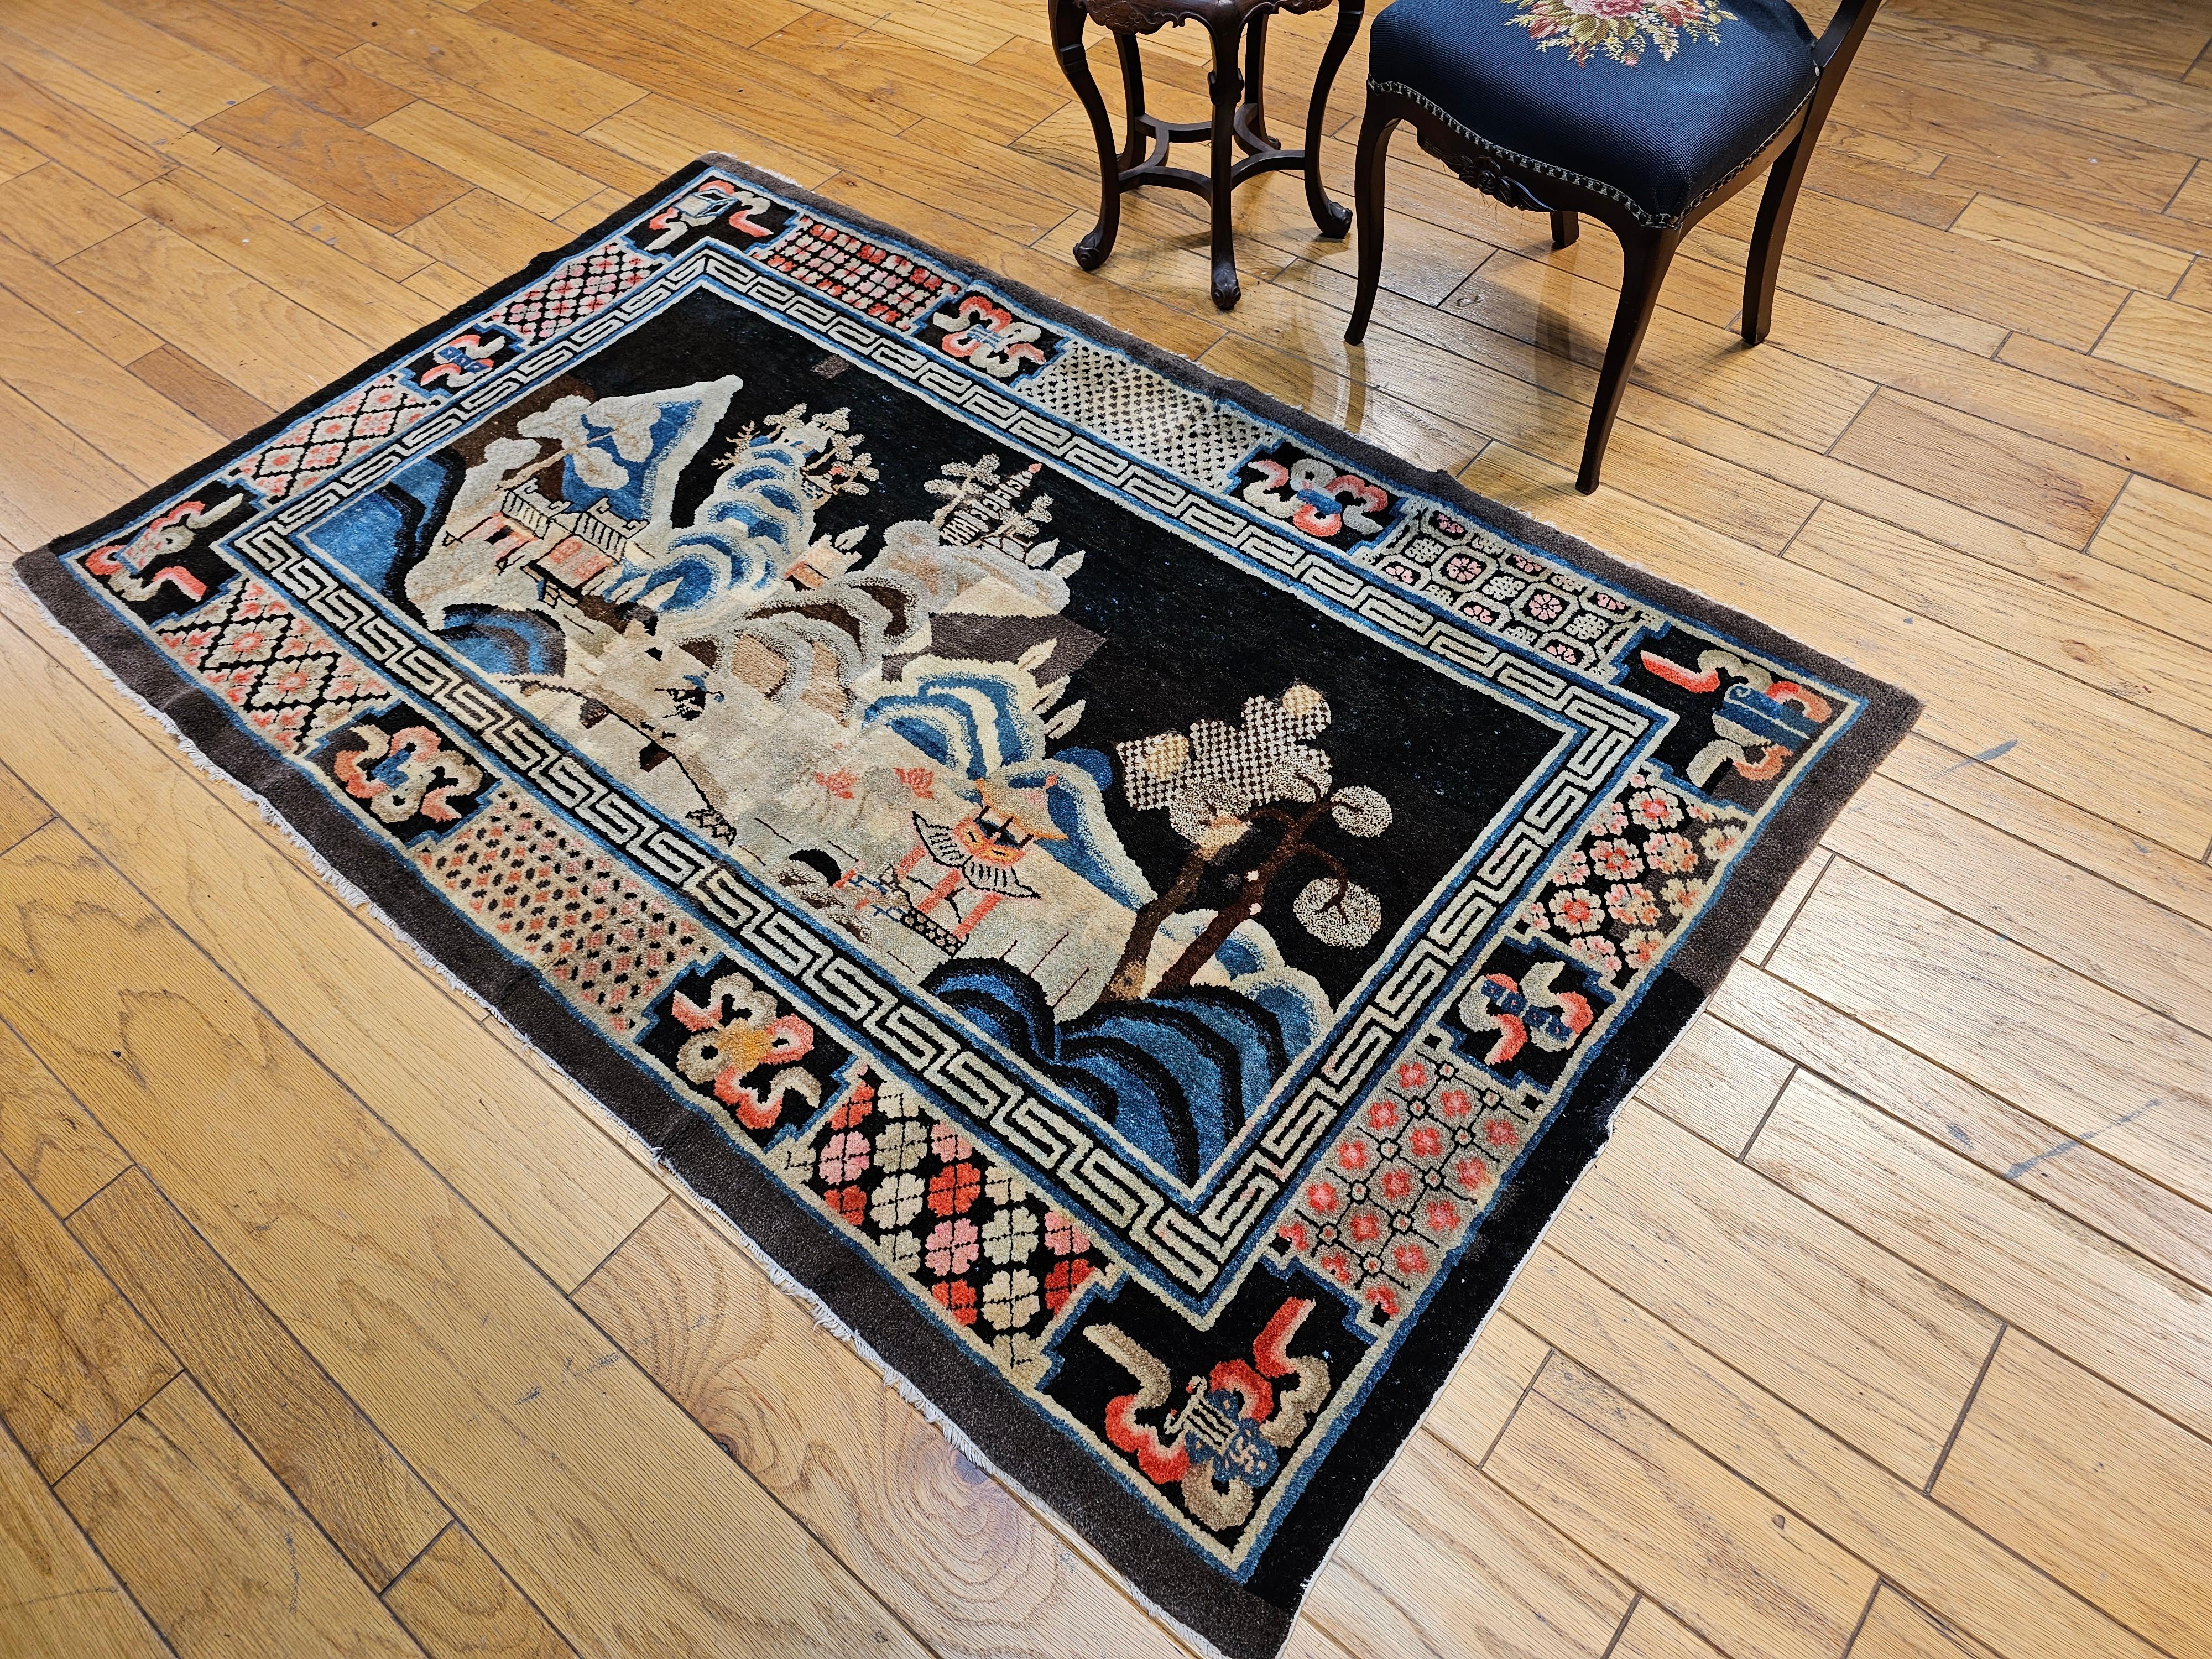 Late 1800s Ningxia Chinese Rug with A Pictorial Design of Forest, Mountains For Sale 3